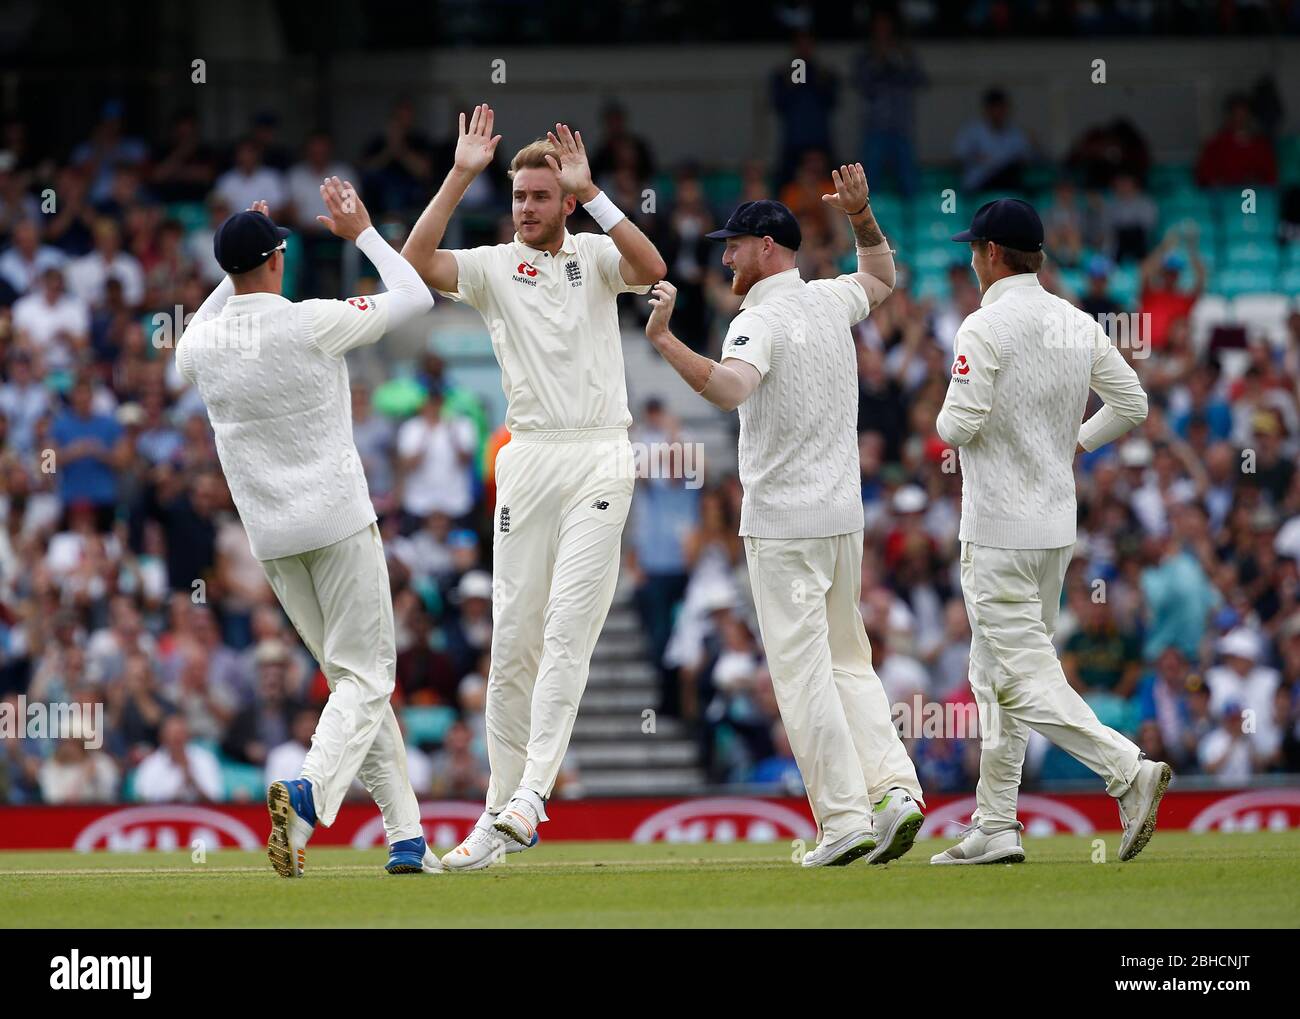 Stuart Broad of England celebrates bowling Heino Kuhn of South Africa during day four of the third Investec Test match between England and South Africa at The Oval in London. 30 Jul 2017 Stock Photo